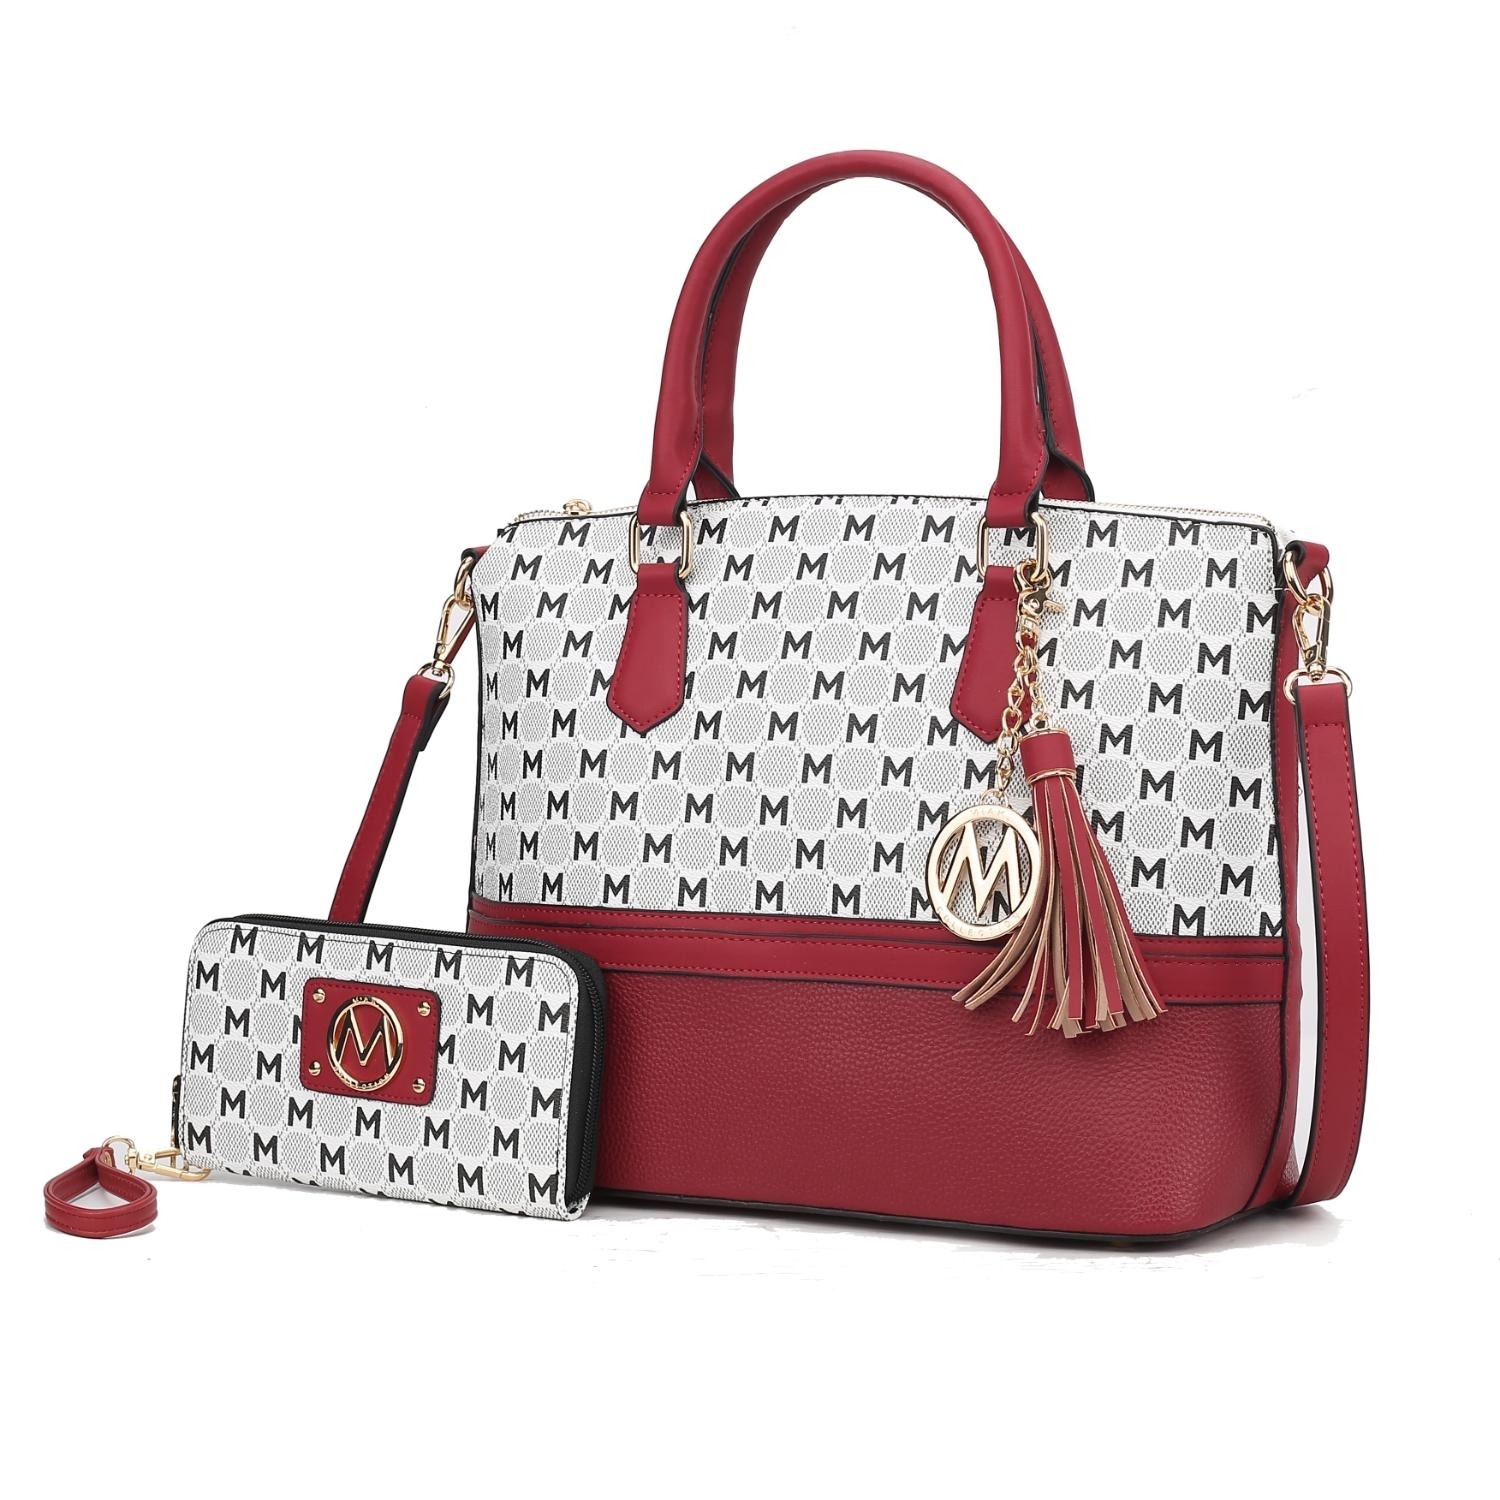 MKF Collection Saylor Circular M Emblem Print Women's Tote Bag With Matching Wristlet Wallet 2 Pieces By Mia K - Red